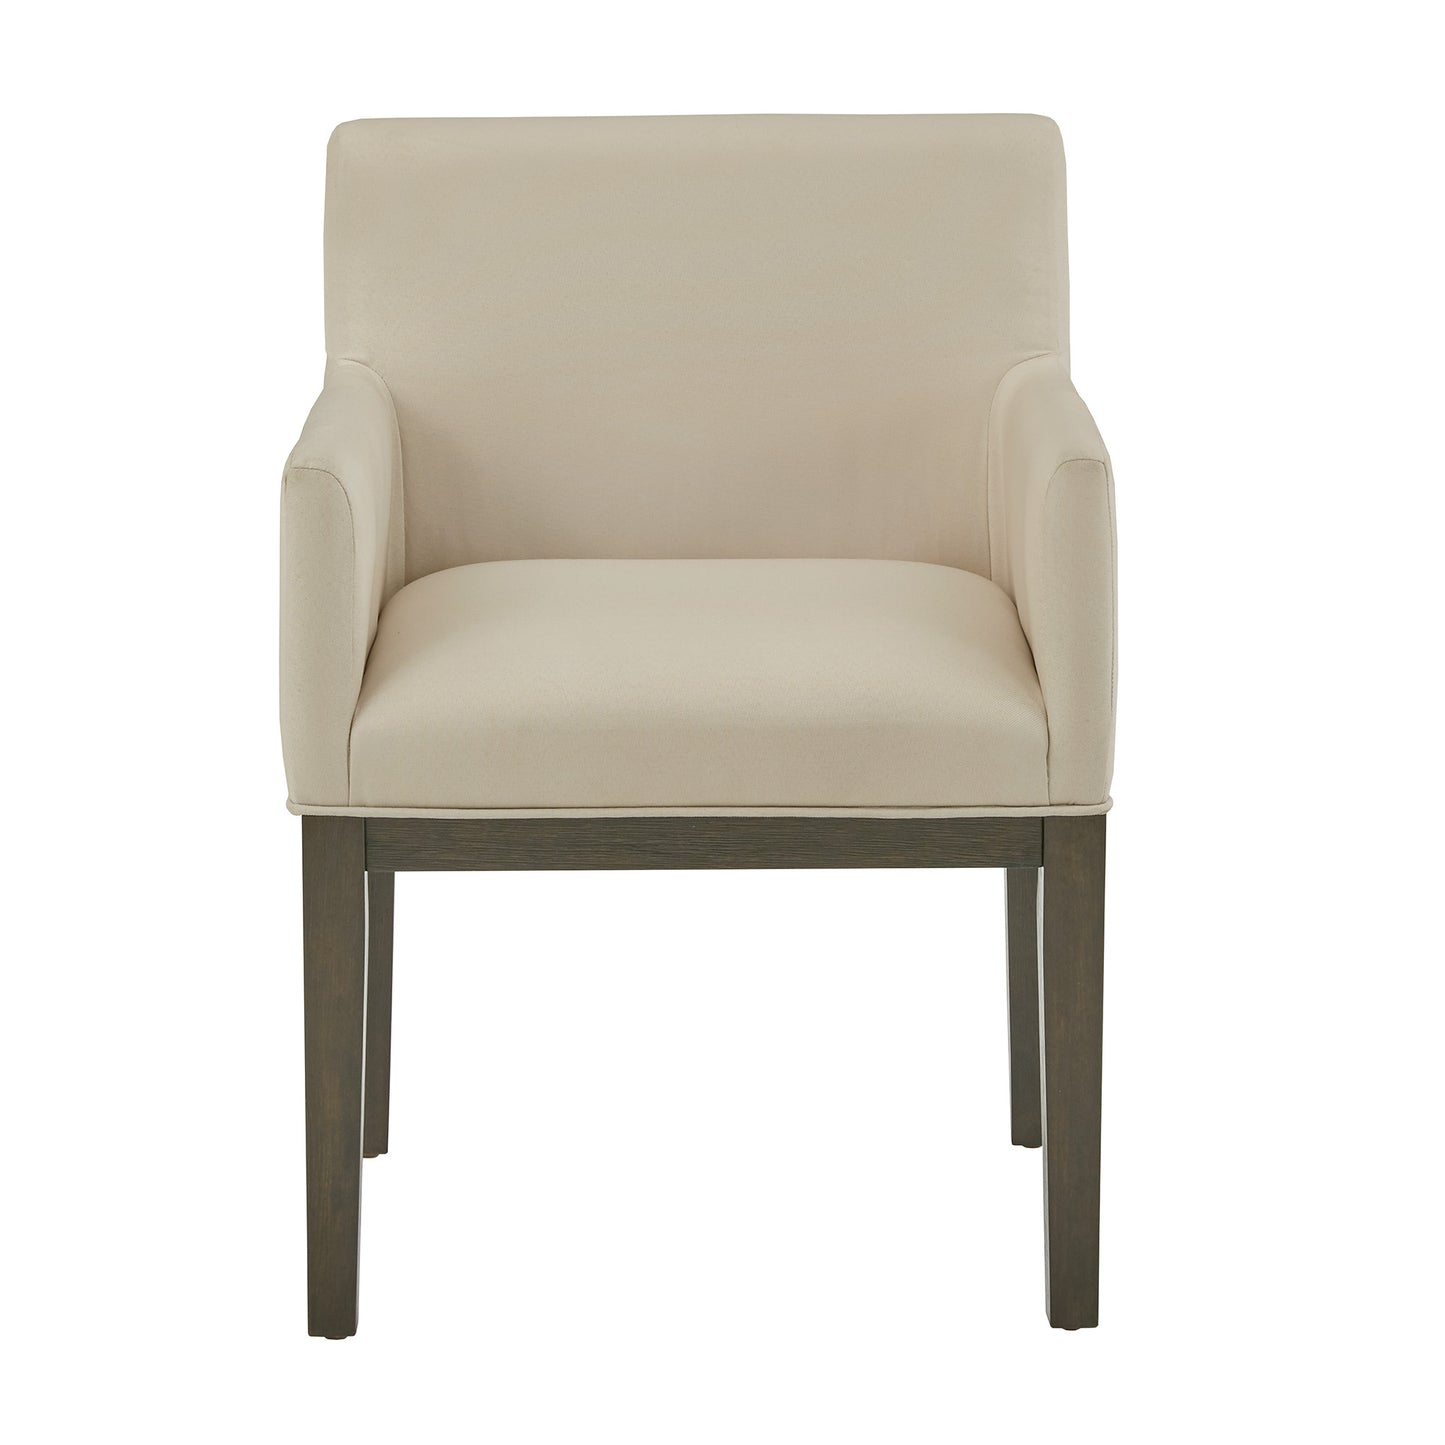 Weathered Grey Finish Fabric Dining Chair (Set of 2) - Beige Linen, Track Arm